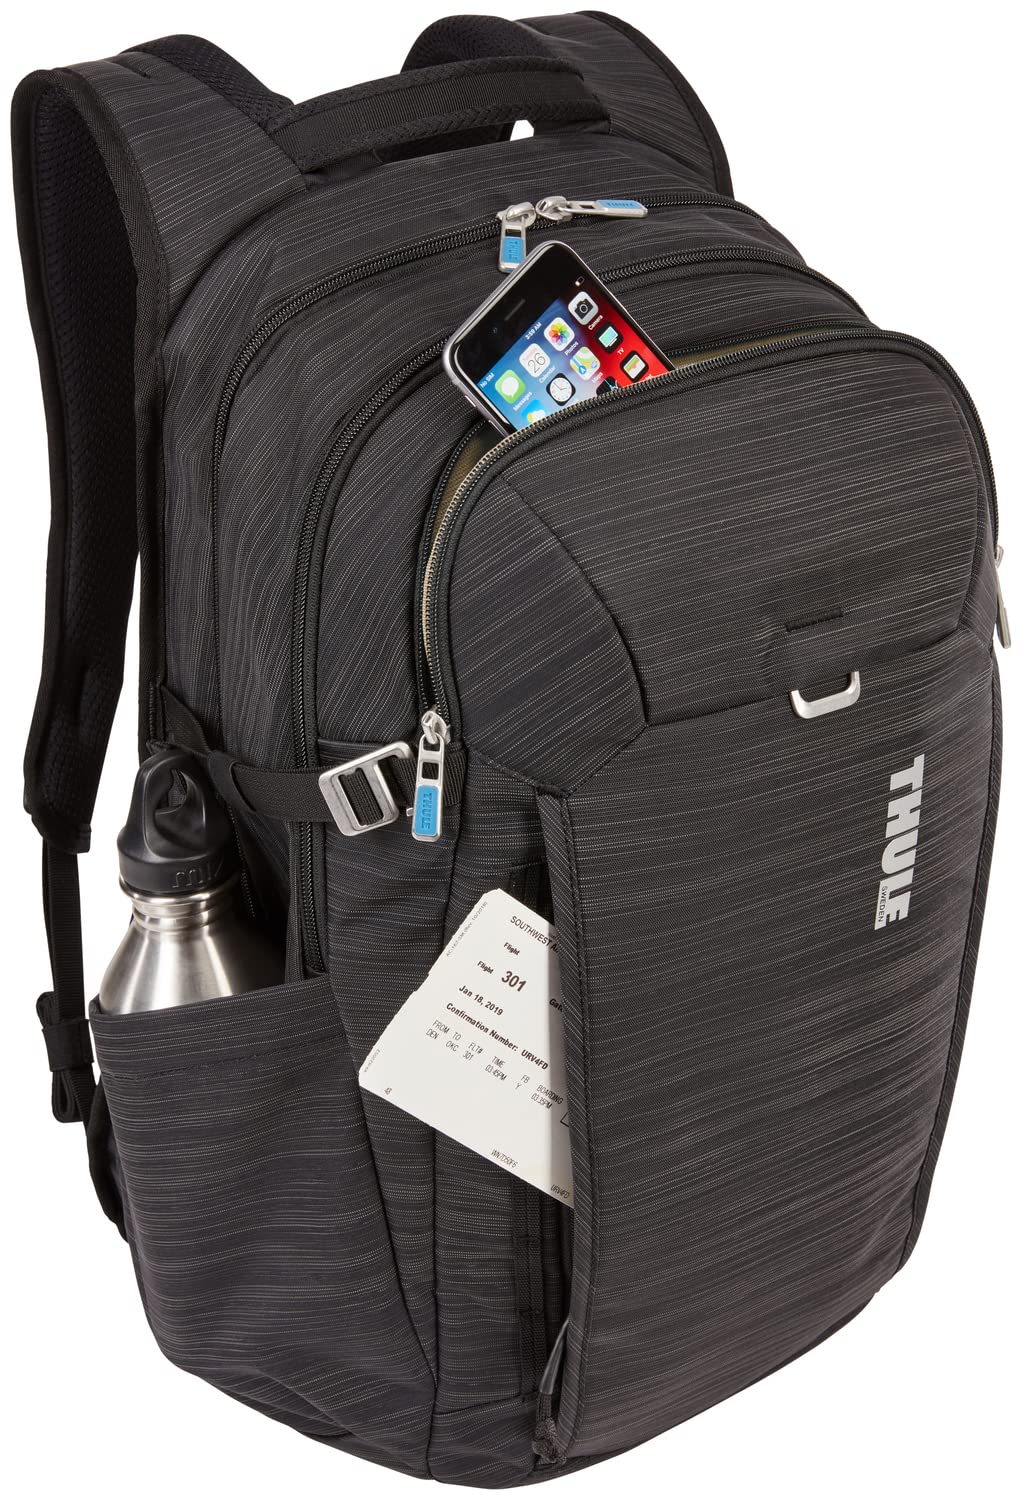 Thule Construct Backpack